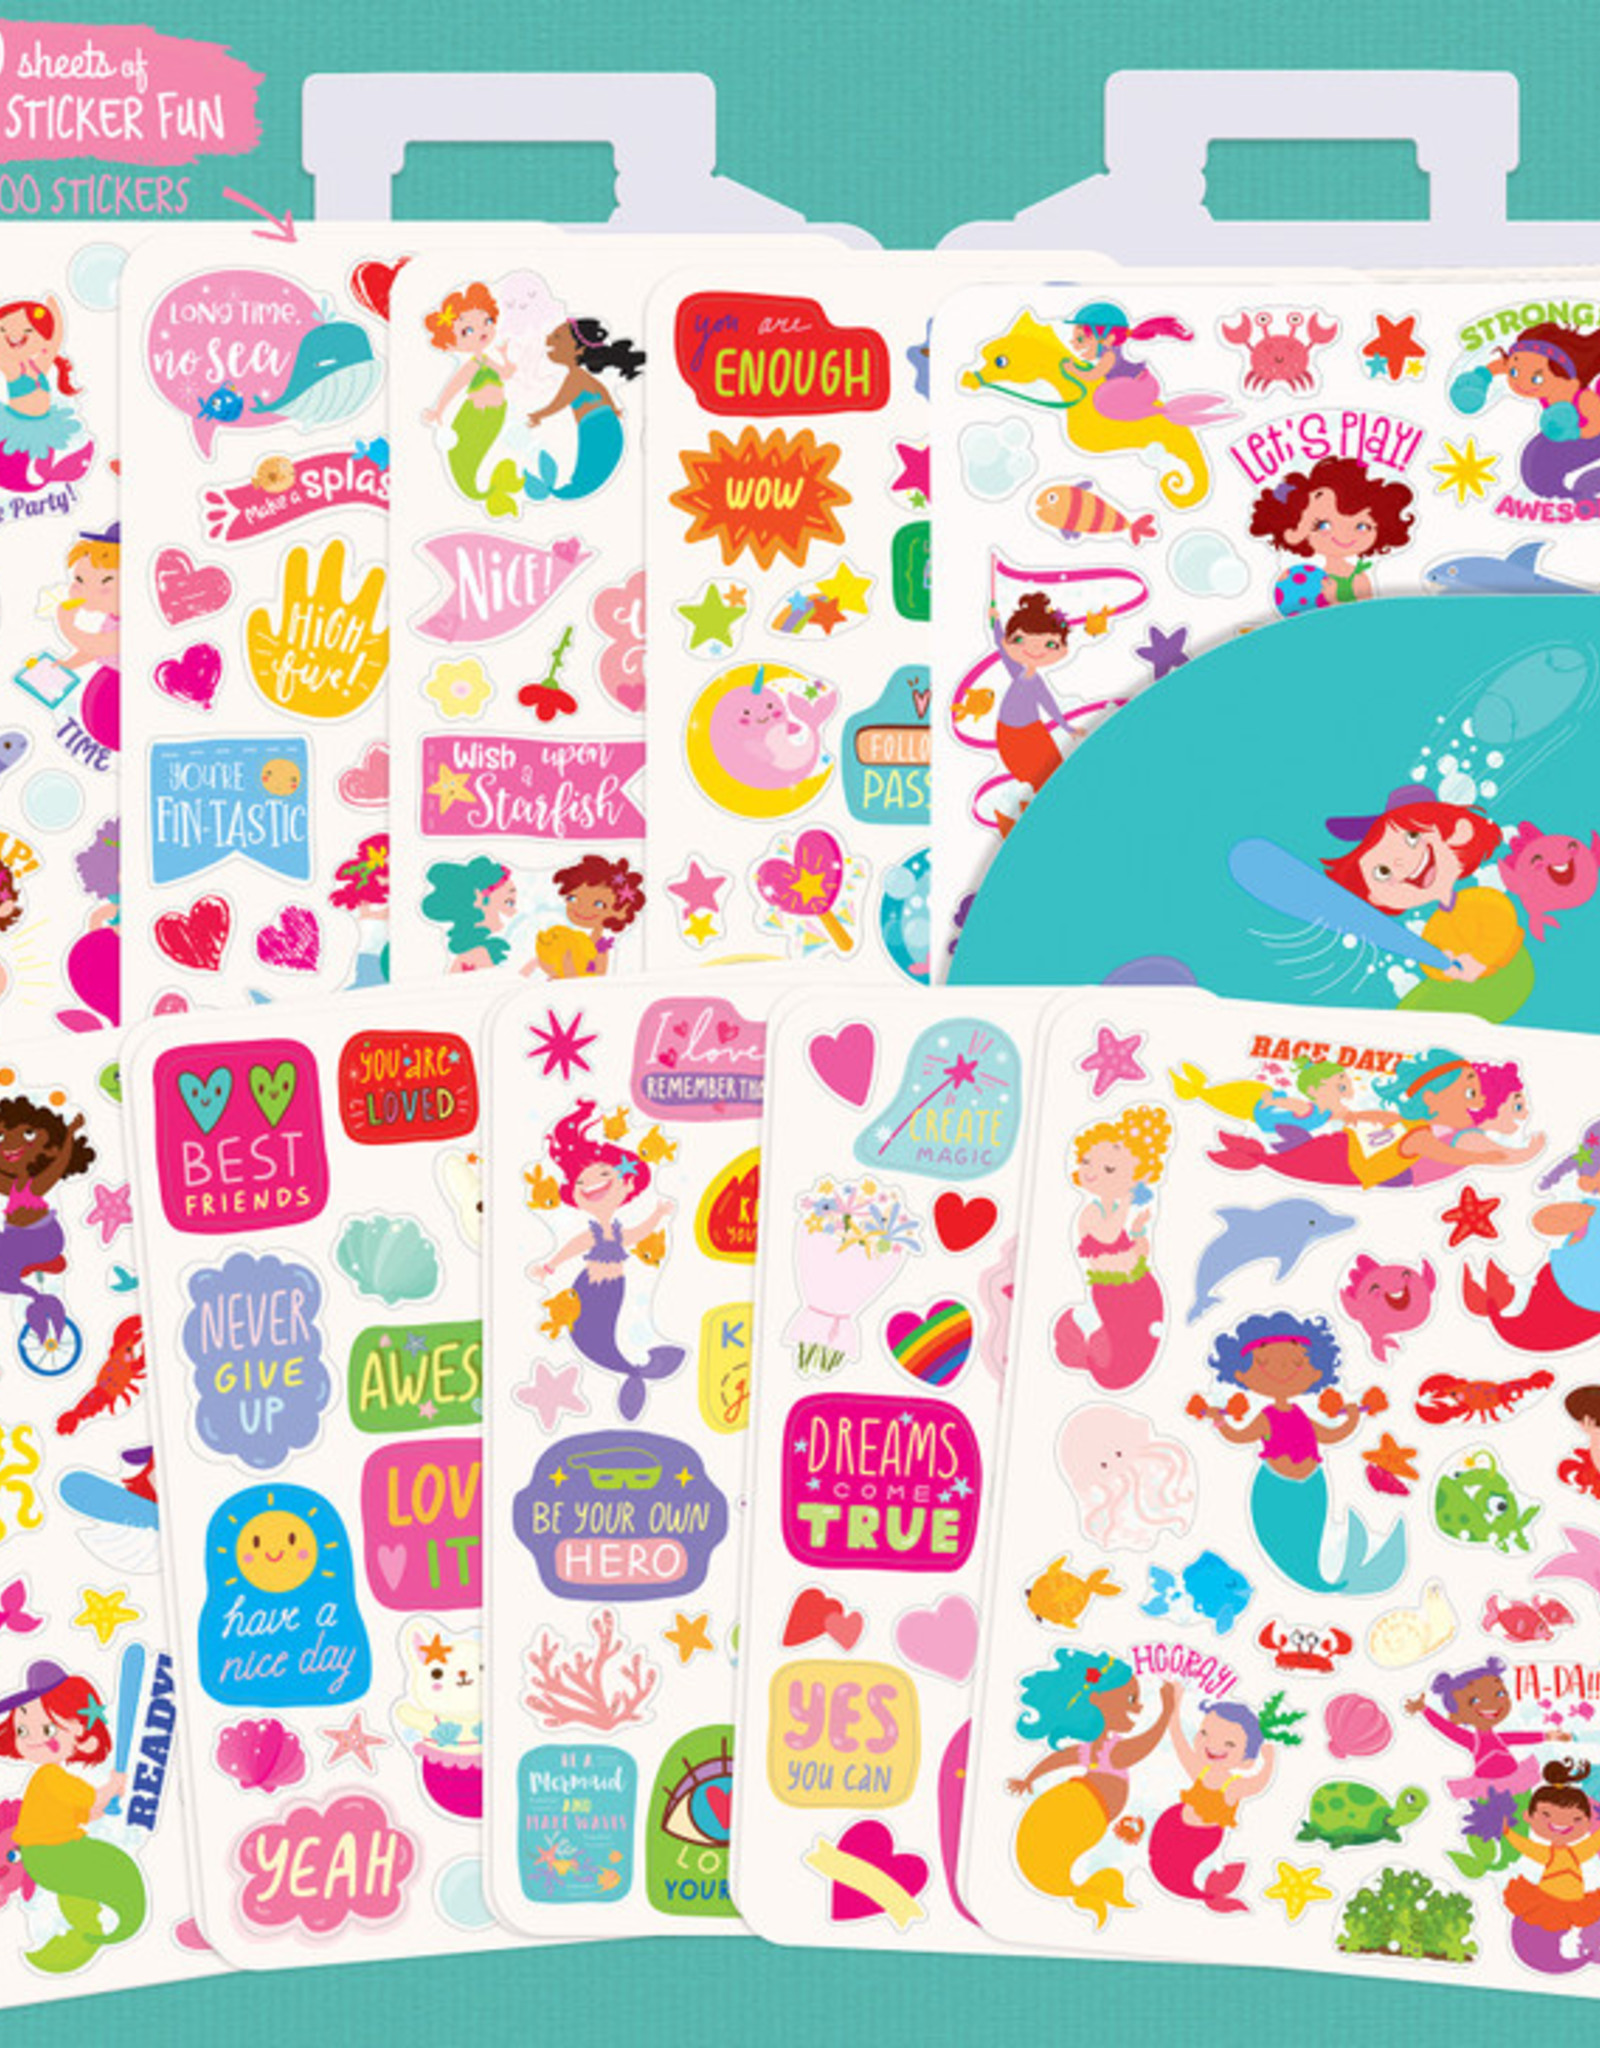 The Piggy Story 500+ Stickers On-The-Go Team Mermaid